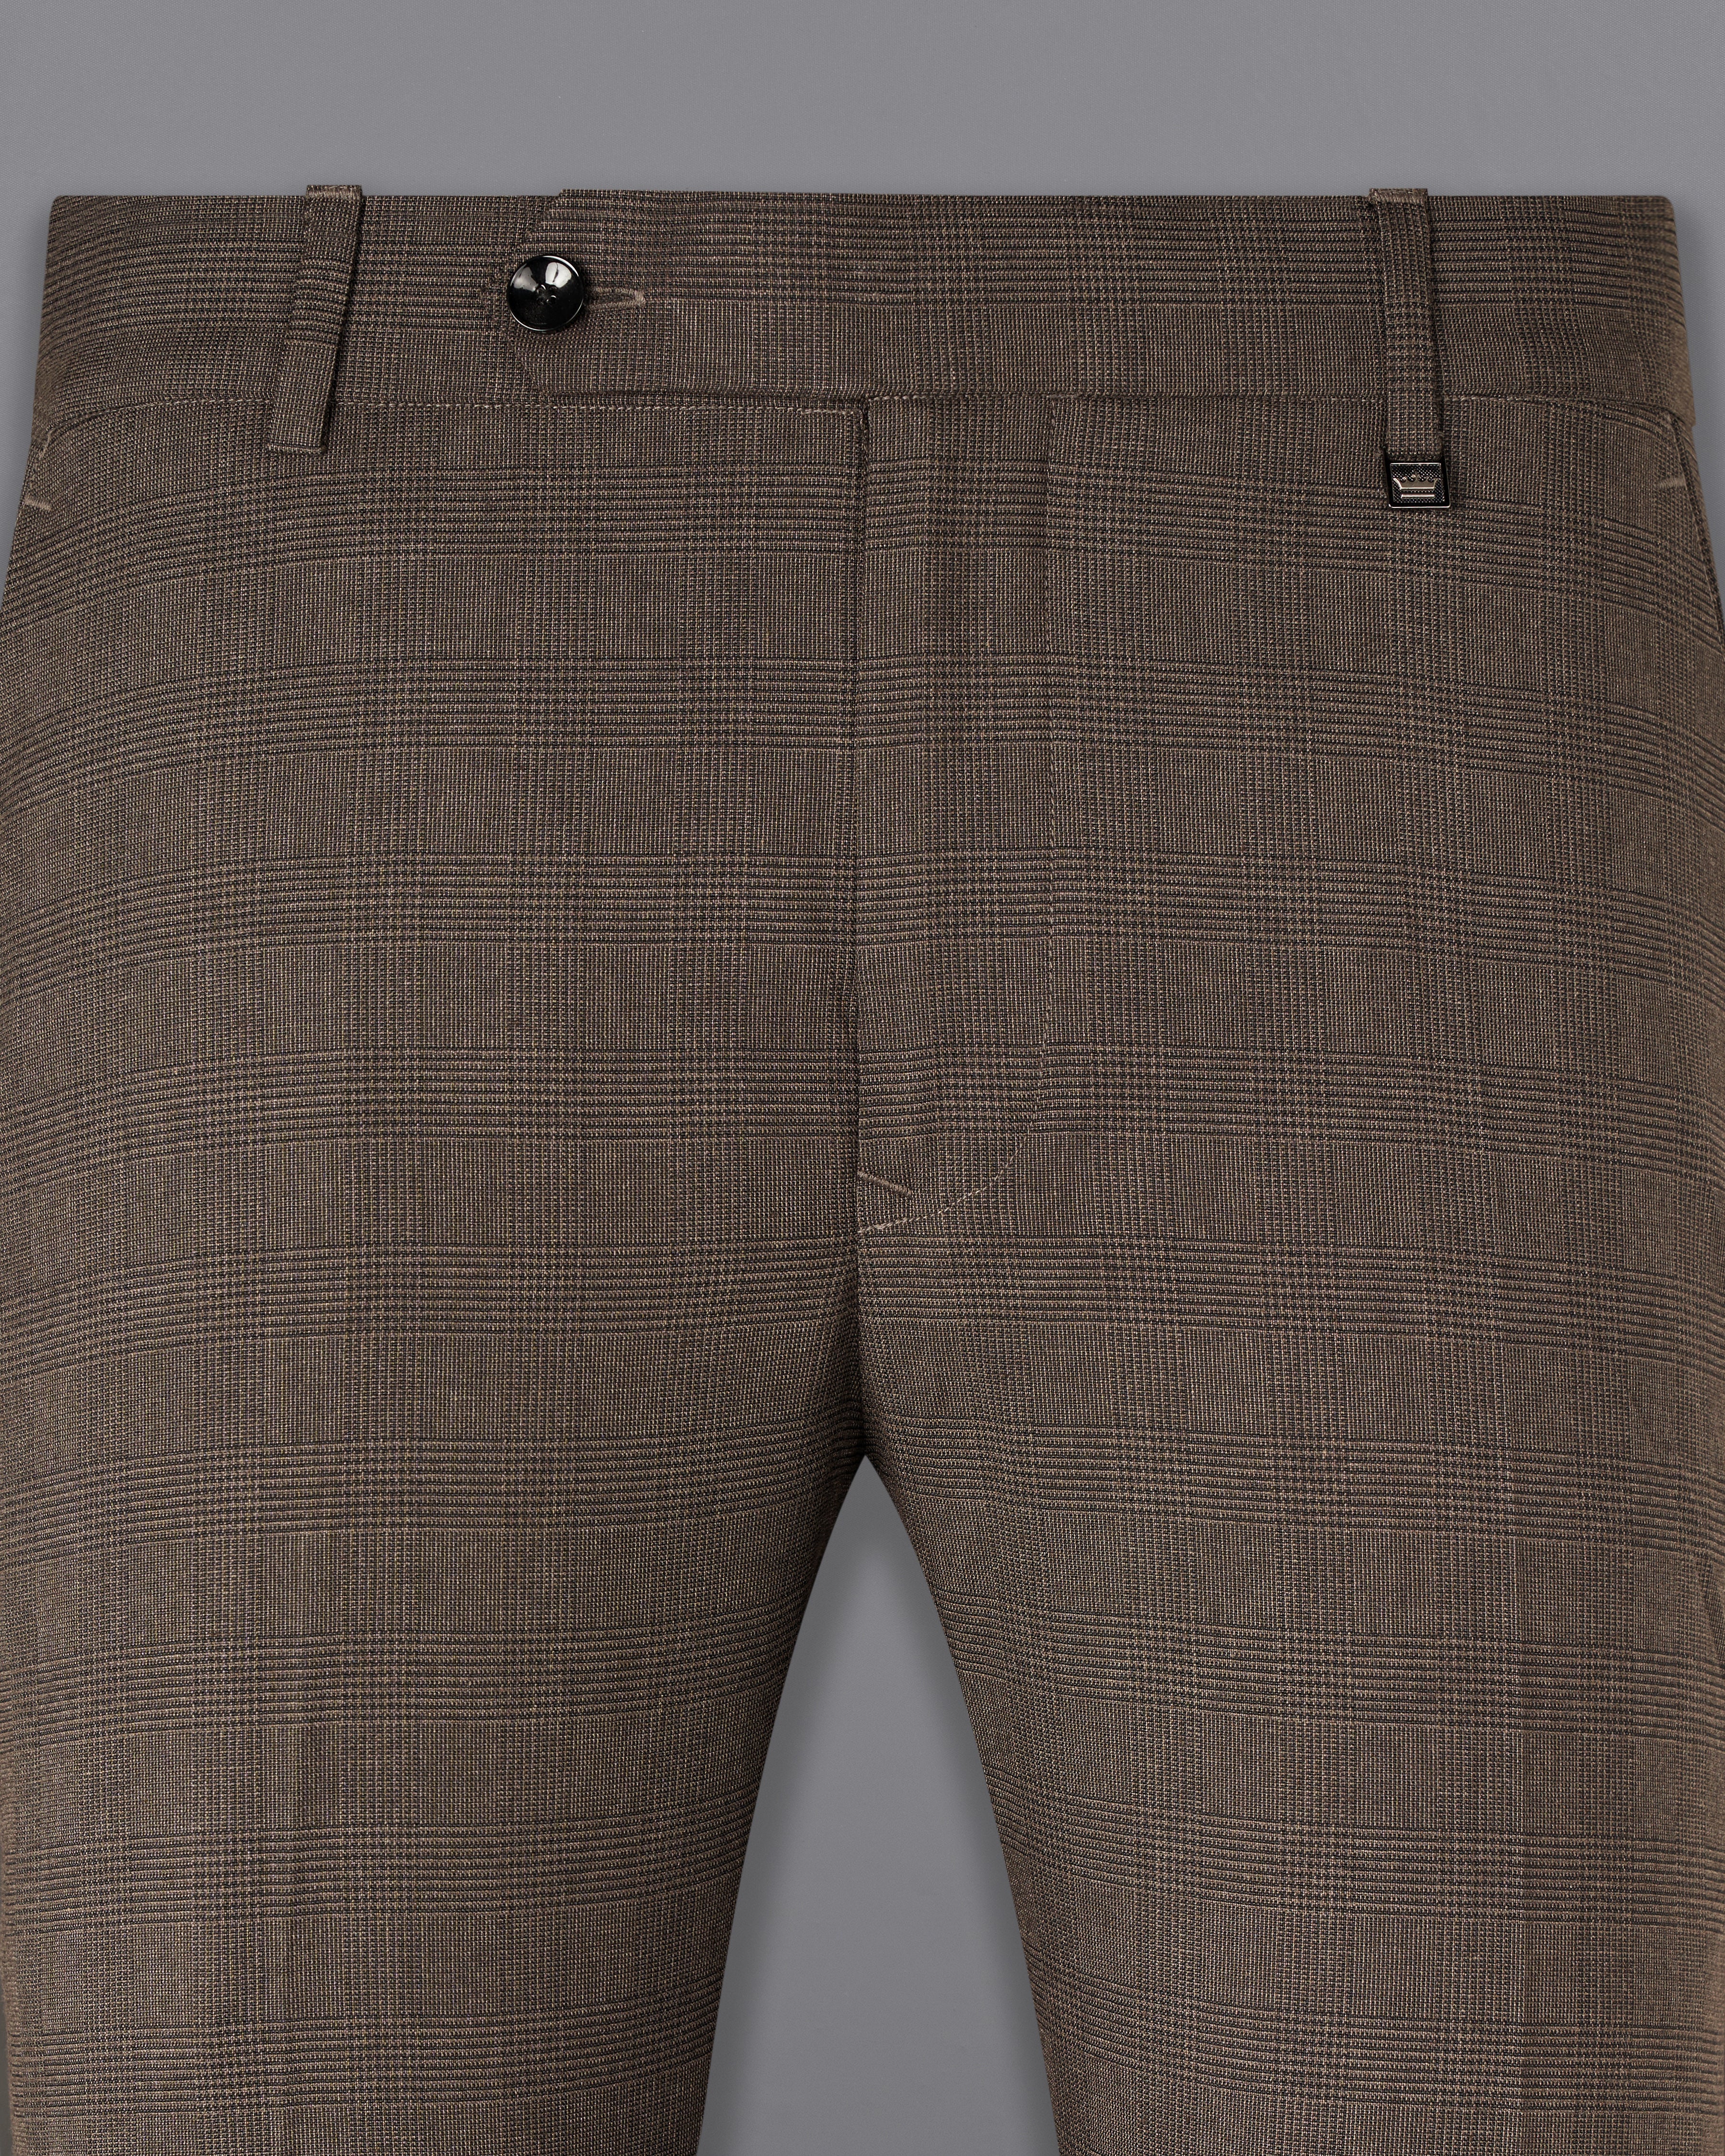 Taupe Coffee Brown Pant T2703-28, T2703-30, T2703-32, T2703-34, T2703-36, T2703-38, T2703-40, T2703-42, T2703-44